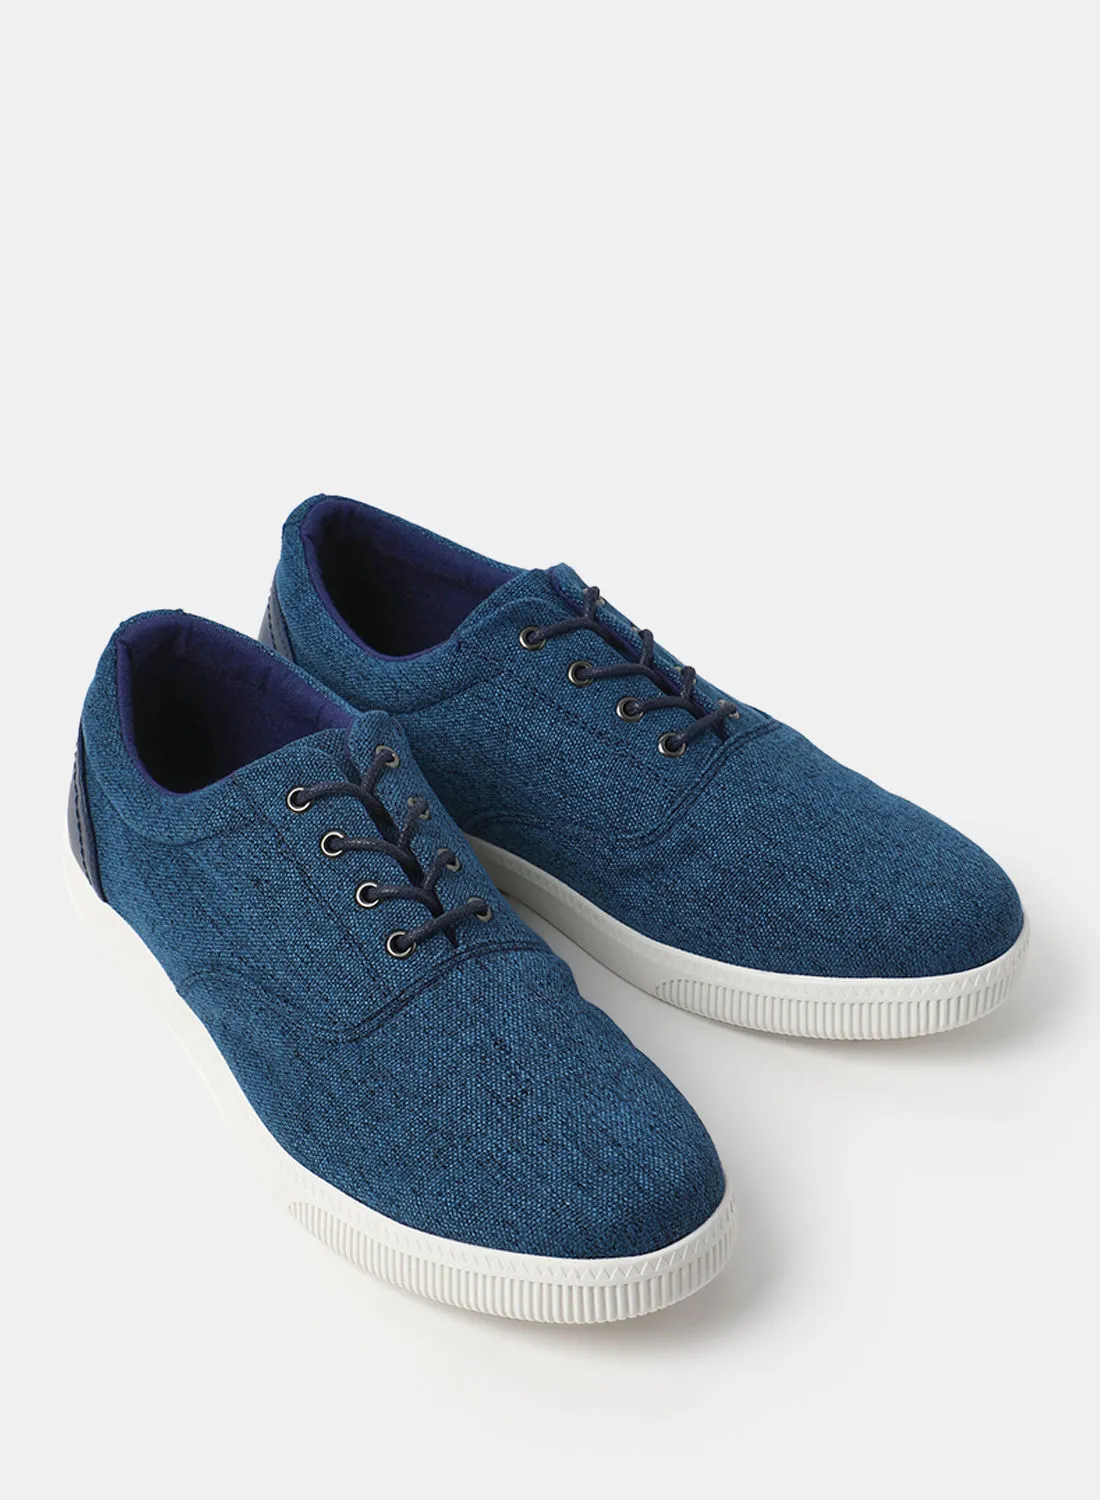 Athletiq Low Top Sneakers Navy Blue